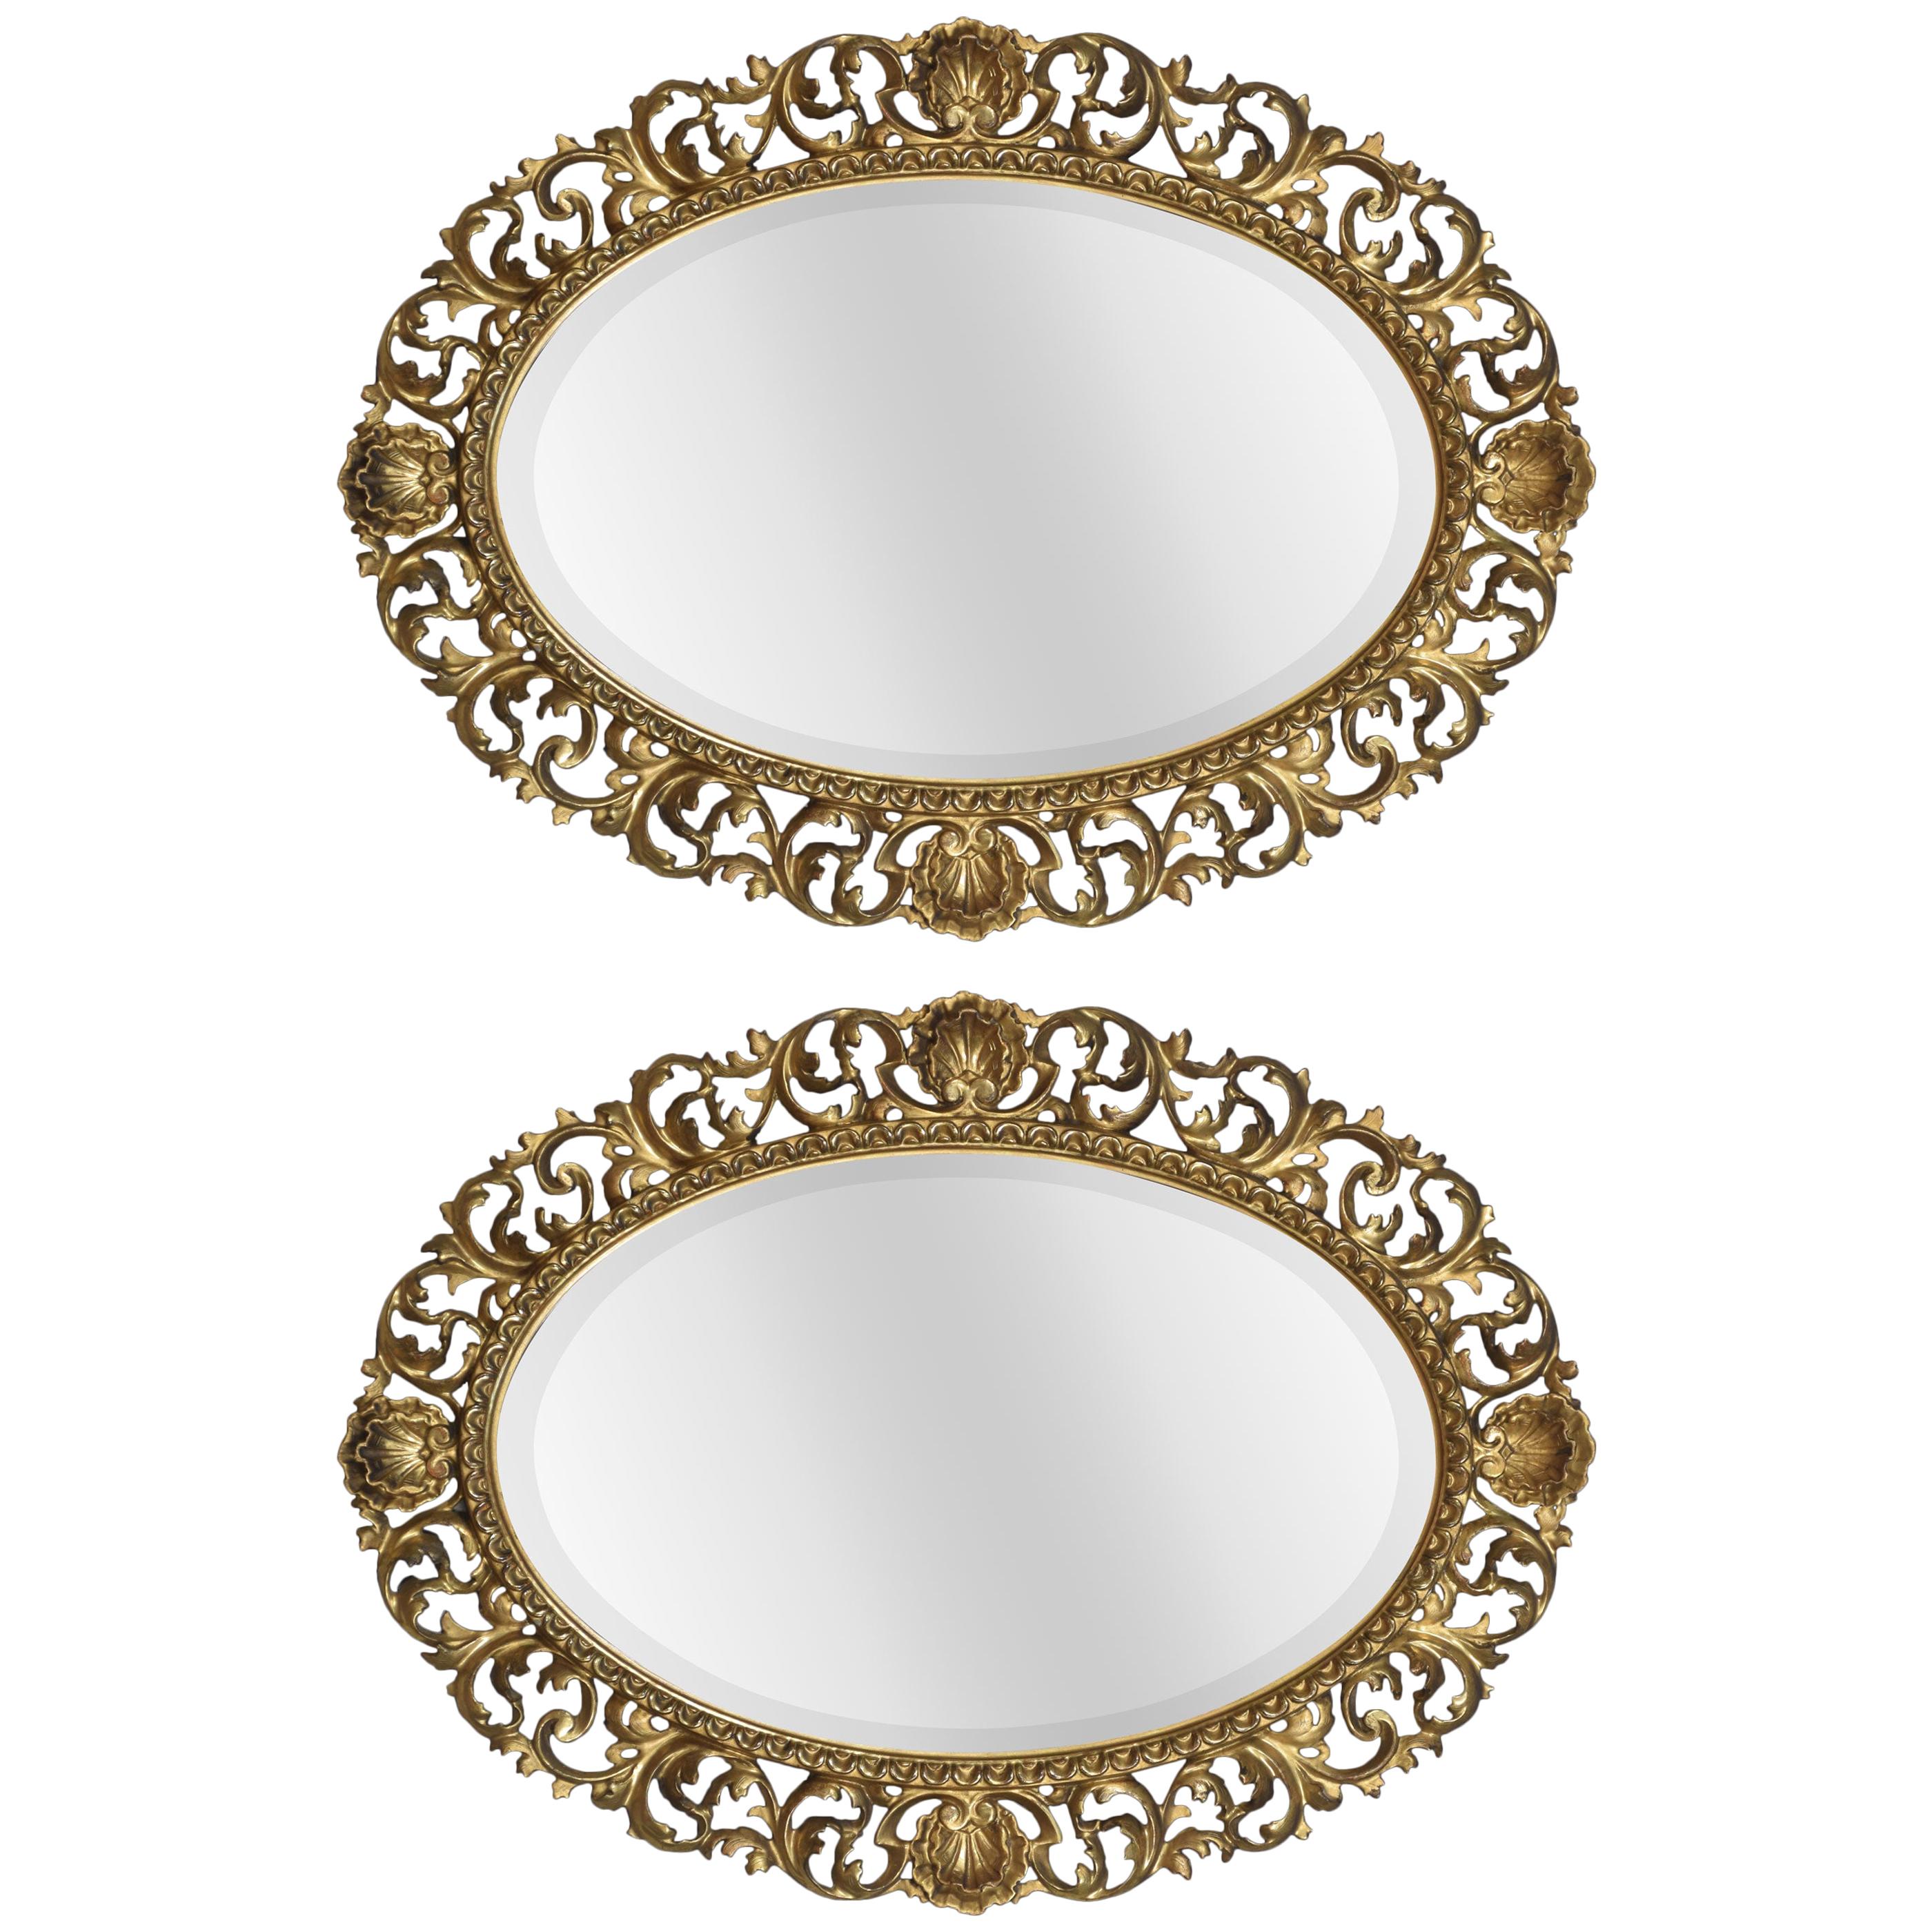 Pair of Oval Florentine Gilt Wall Mirrors